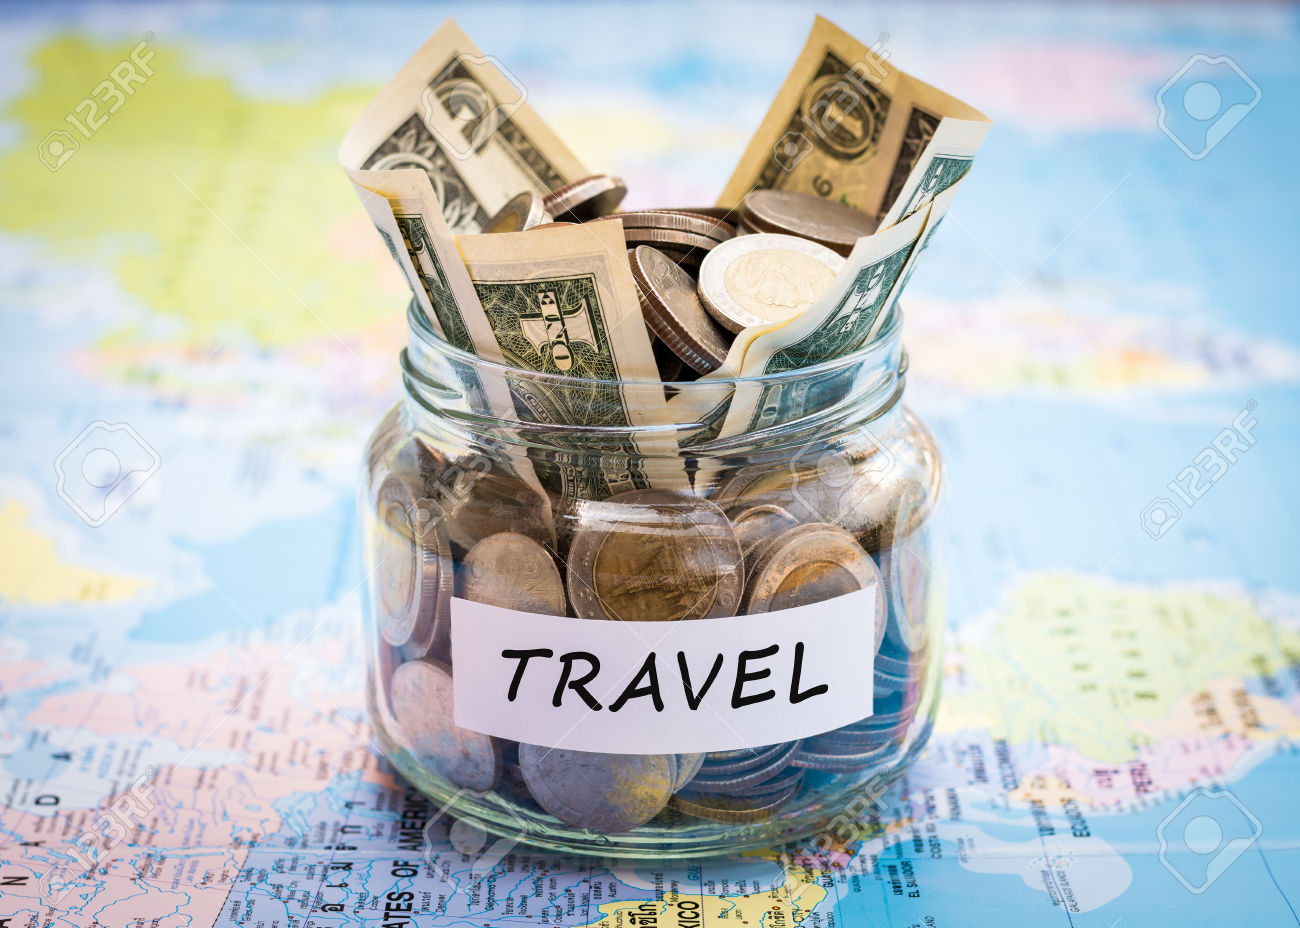 Travel budget concept. Travel money savings in a glass jar on world map